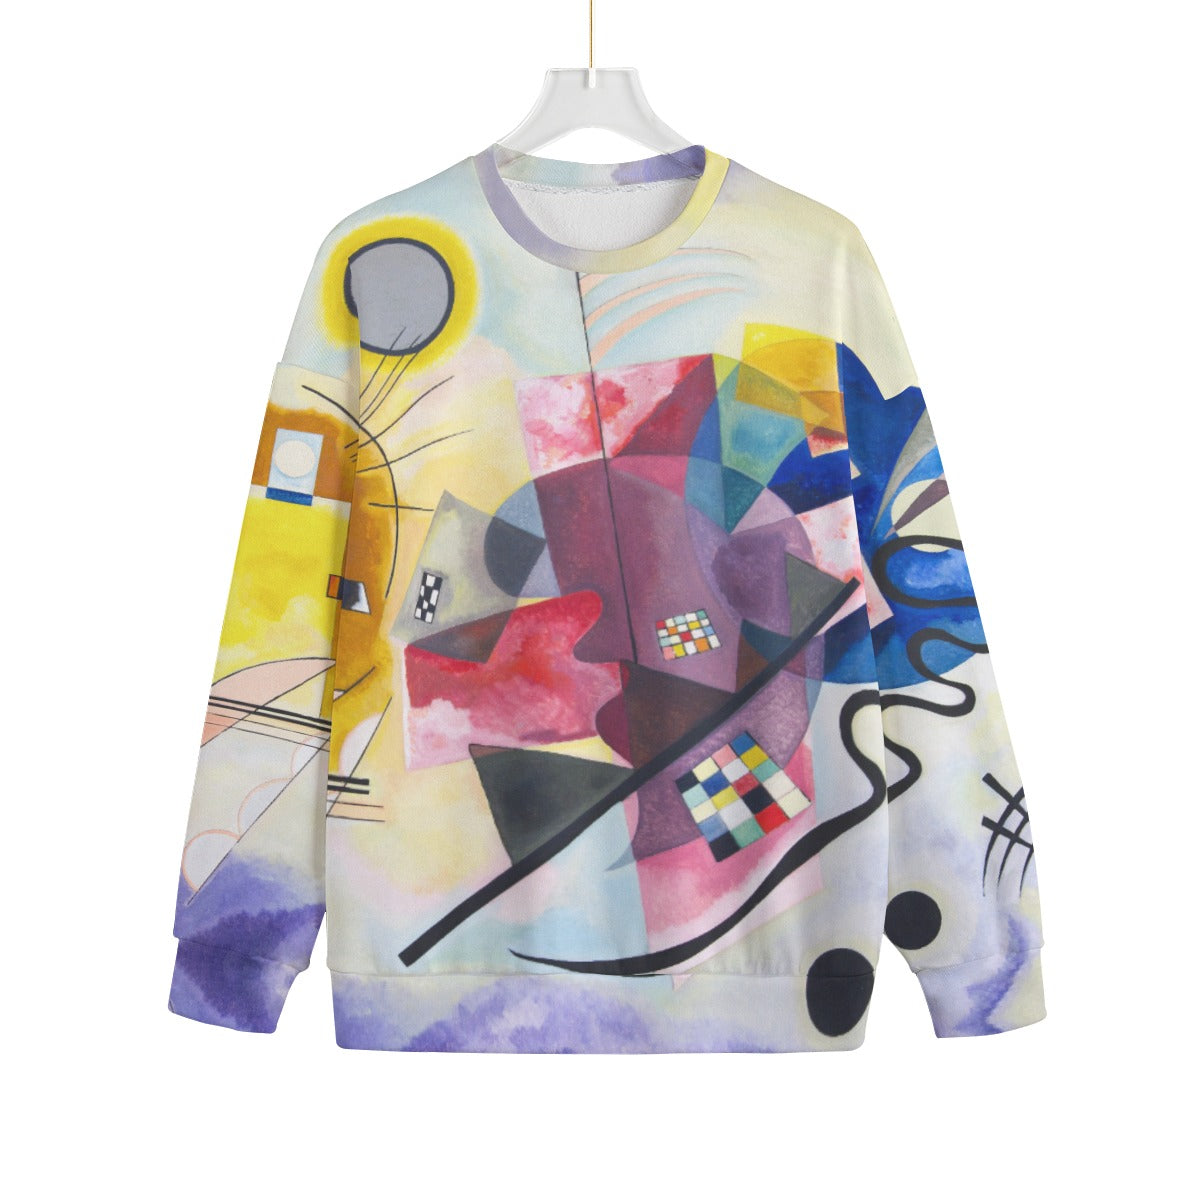 Colorful abstract sweater on display